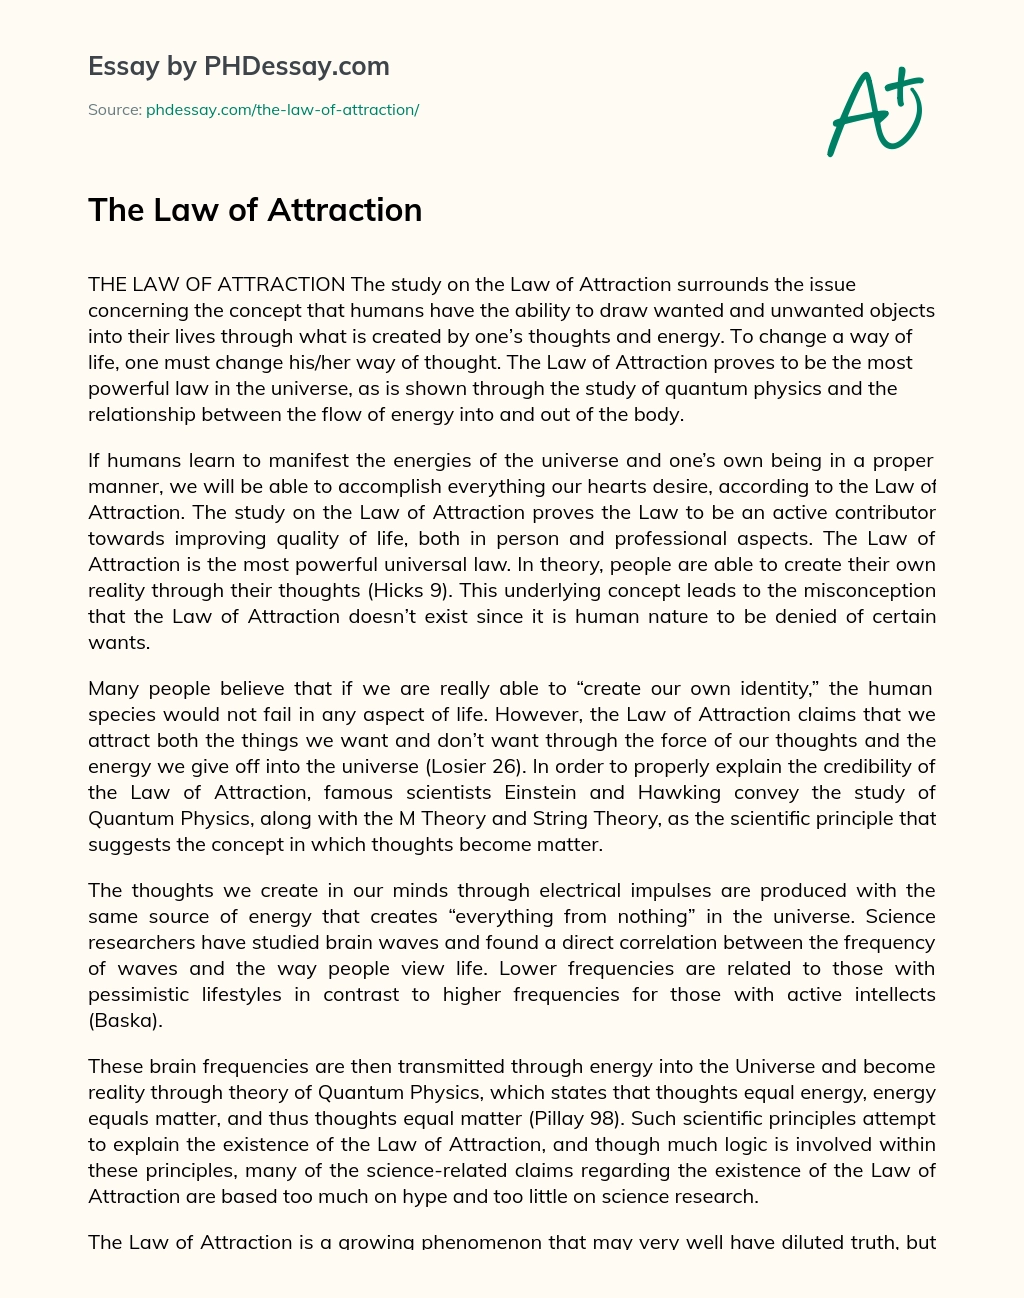 The Law of Attraction essay